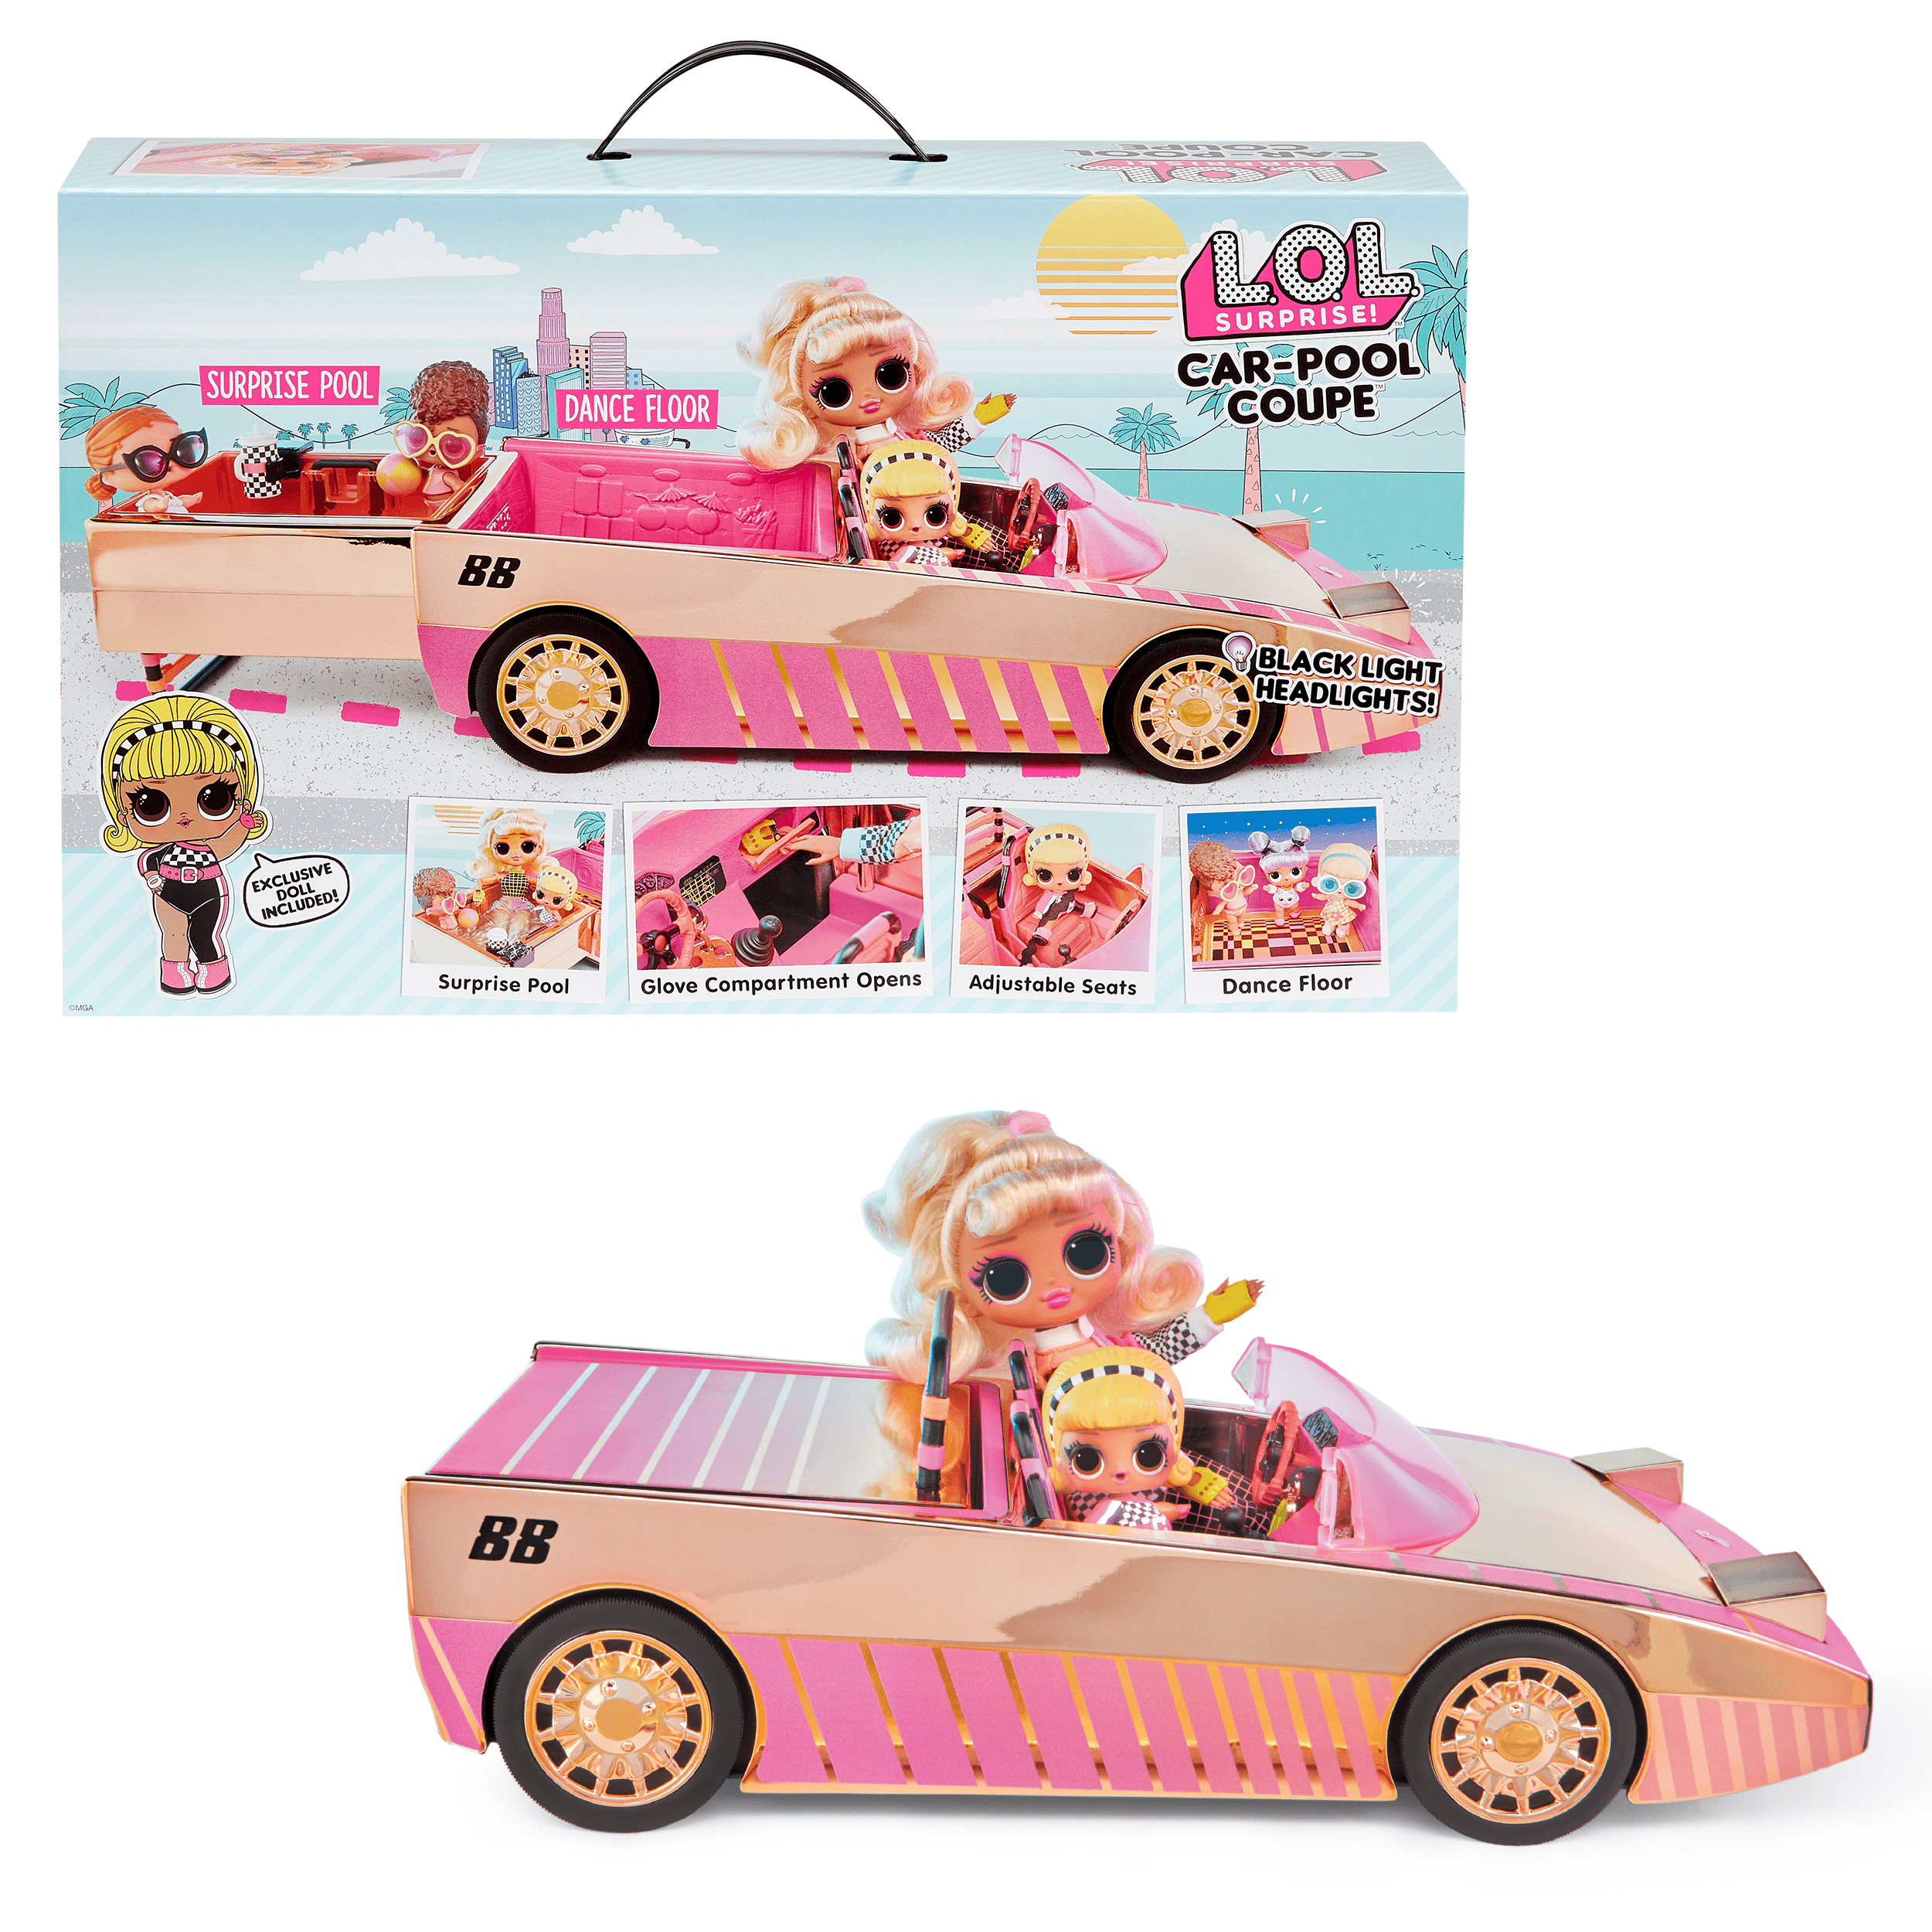 LOL Surprise Car-Pool Coupe with Exclusive Doll, Surprise Pool & Dance Floor, Great Gift for Kids Ages 4 5 6+ - image 1 of 8